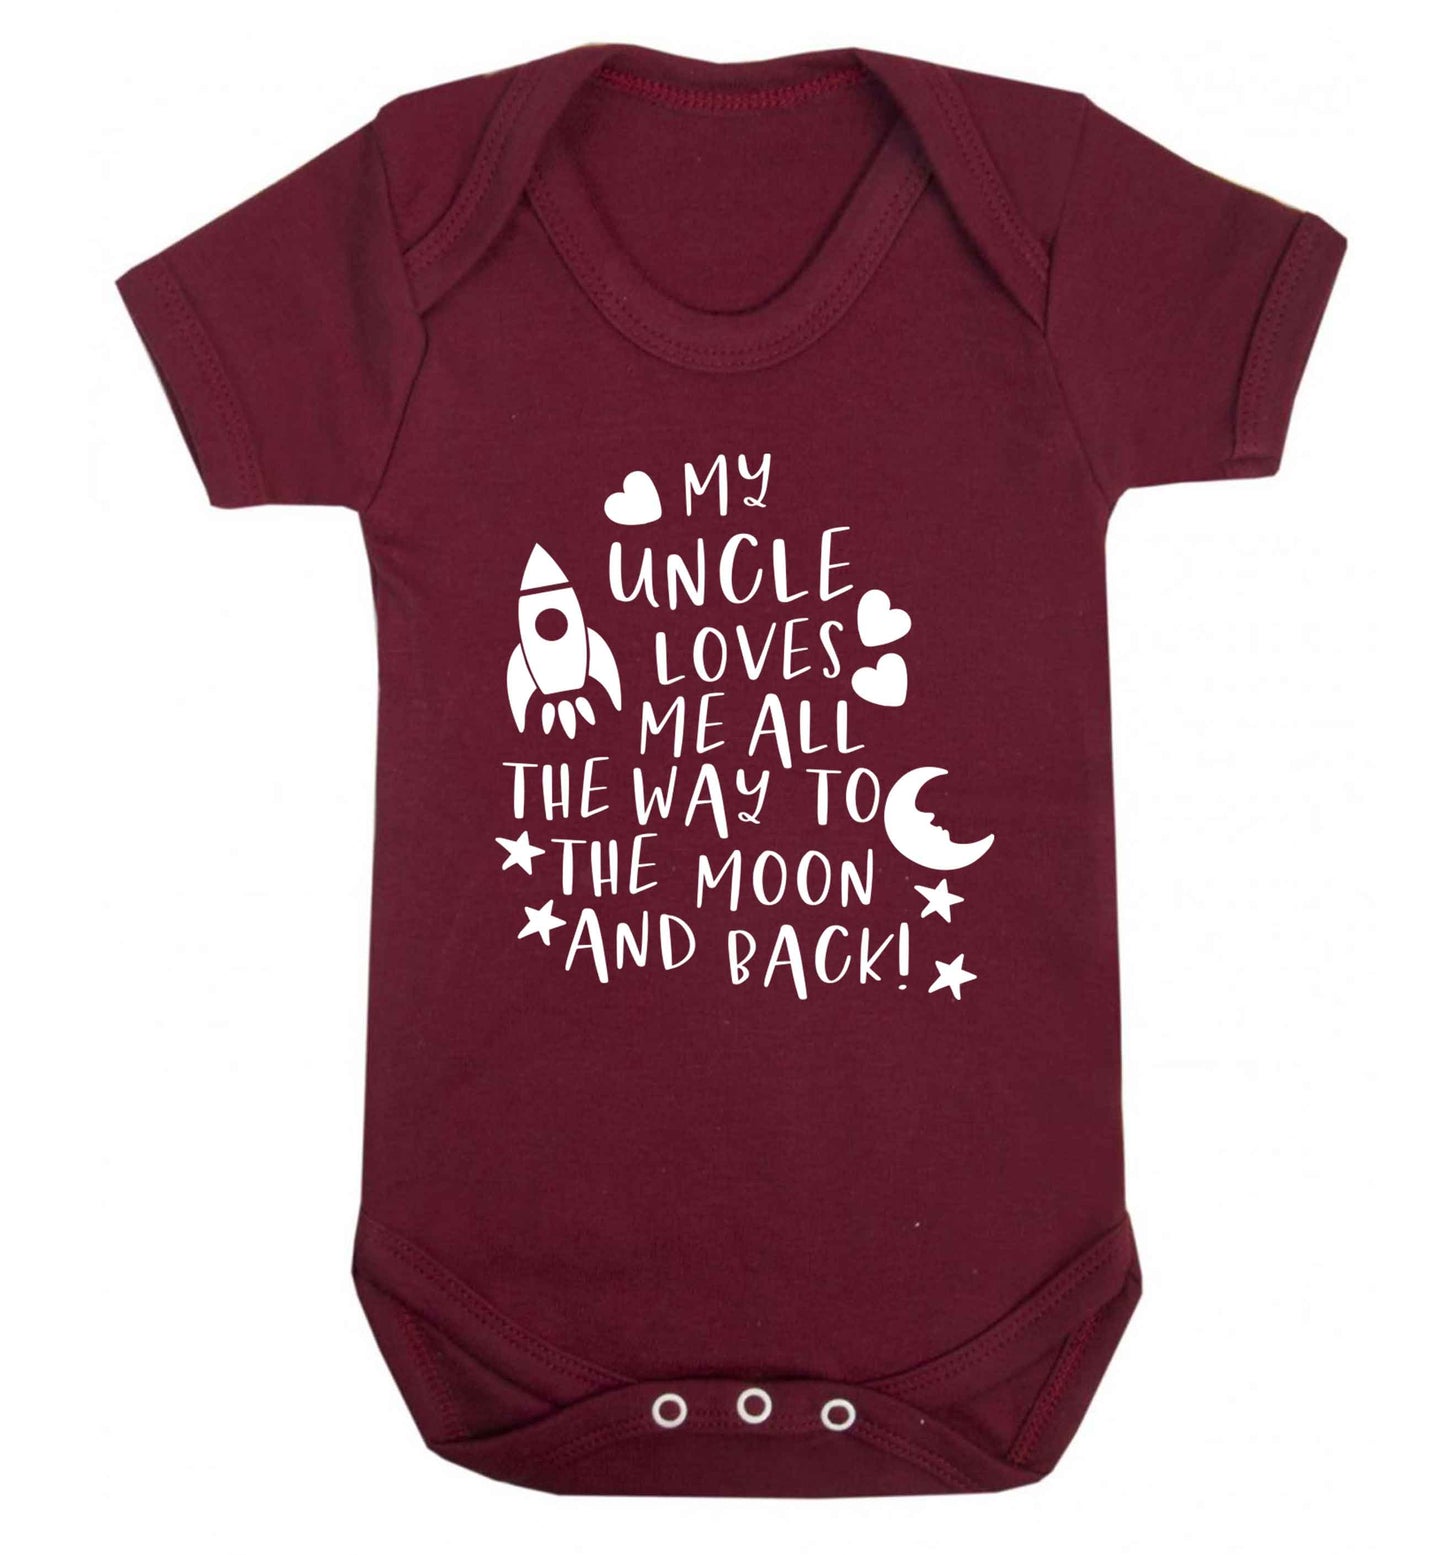 My uncle loves me all the way to the moon and back Baby Vest maroon 18-24 months